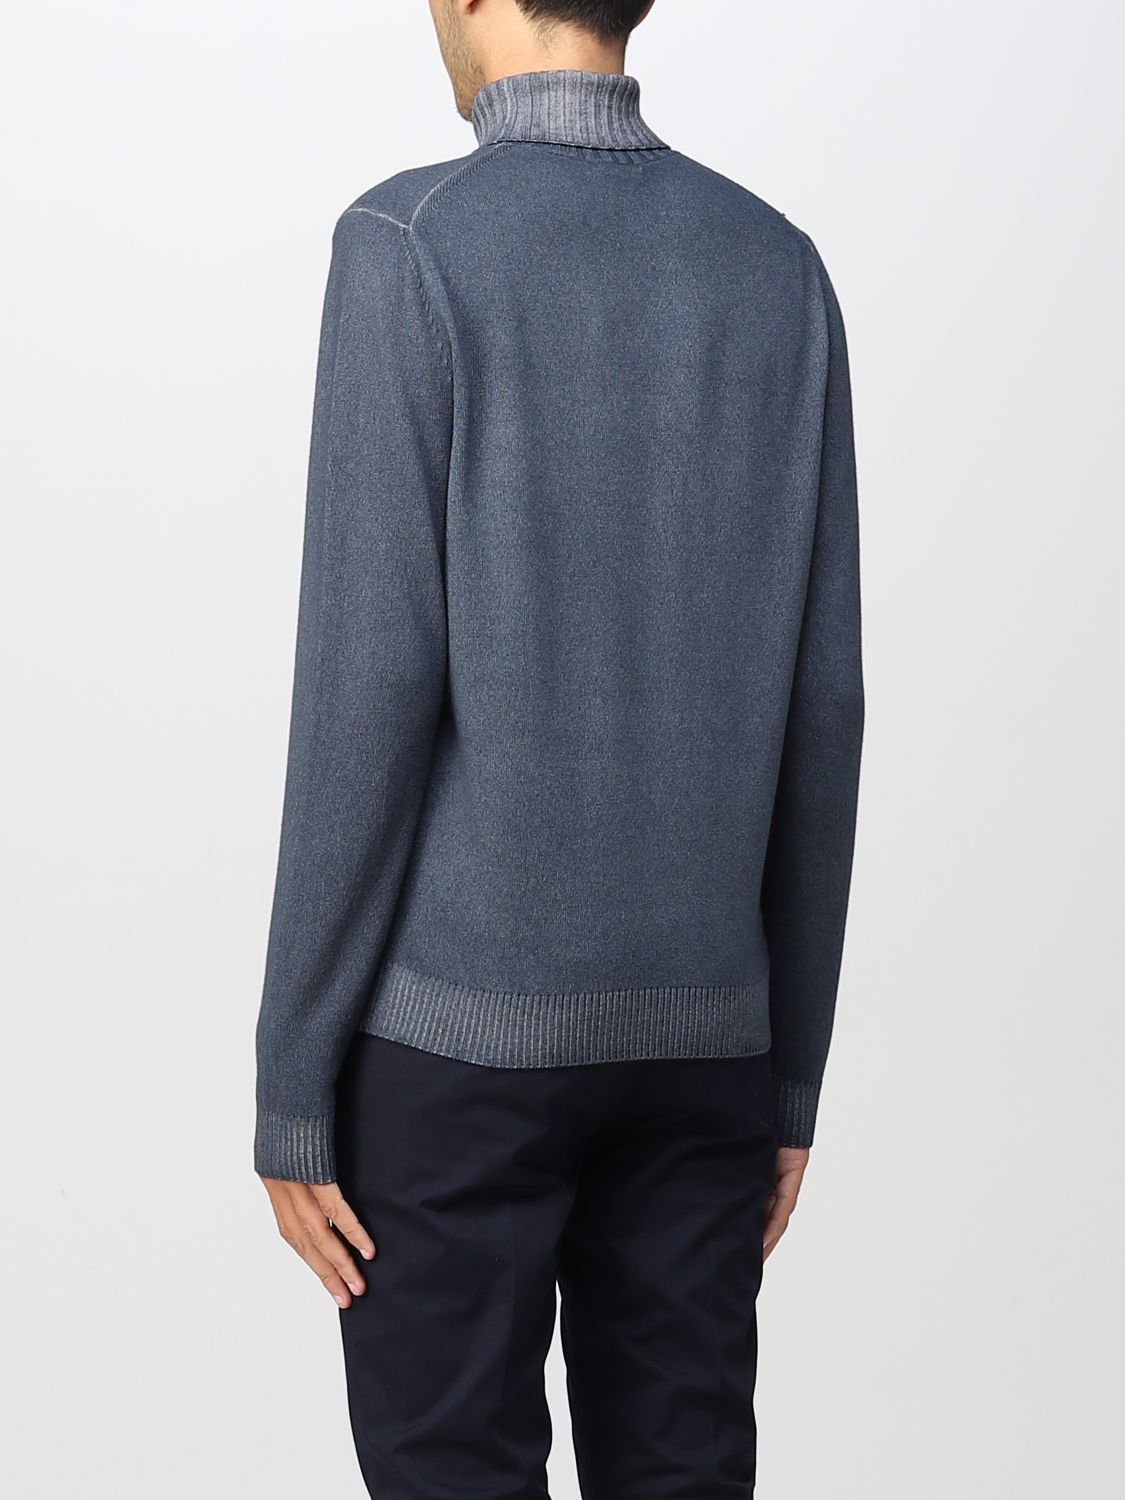 MALO: sweater for man - Charcoal | Malo sweater UCX103F2K11 online on ...